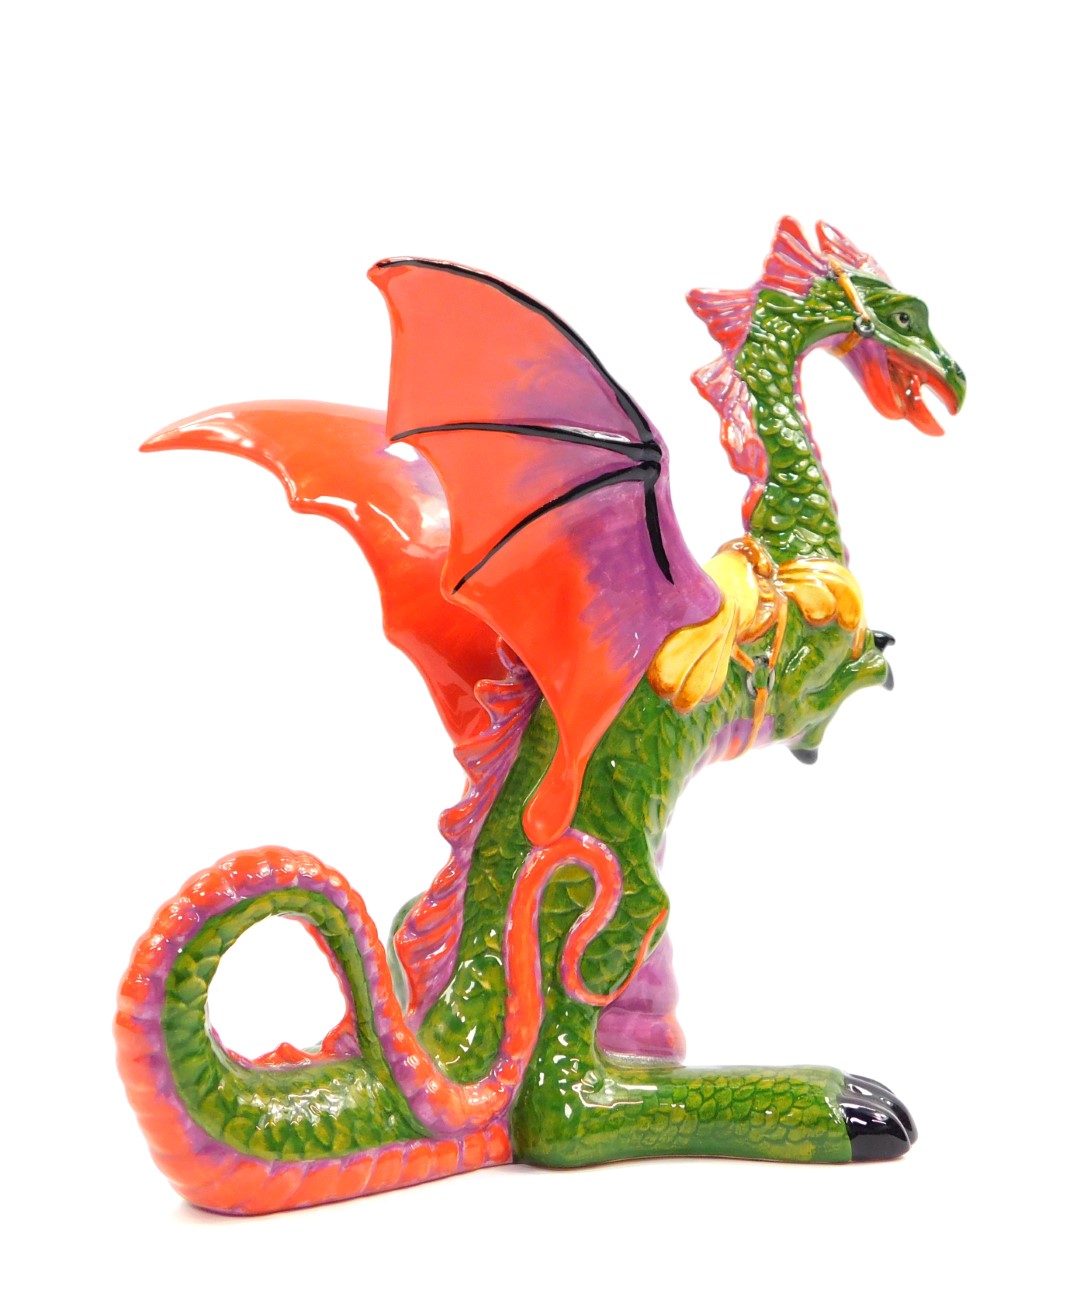 A Lorna Bailey pottery figure of a dragon, limited edition 11/100, printed and painted marks, 27.5cm - Image 4 of 5